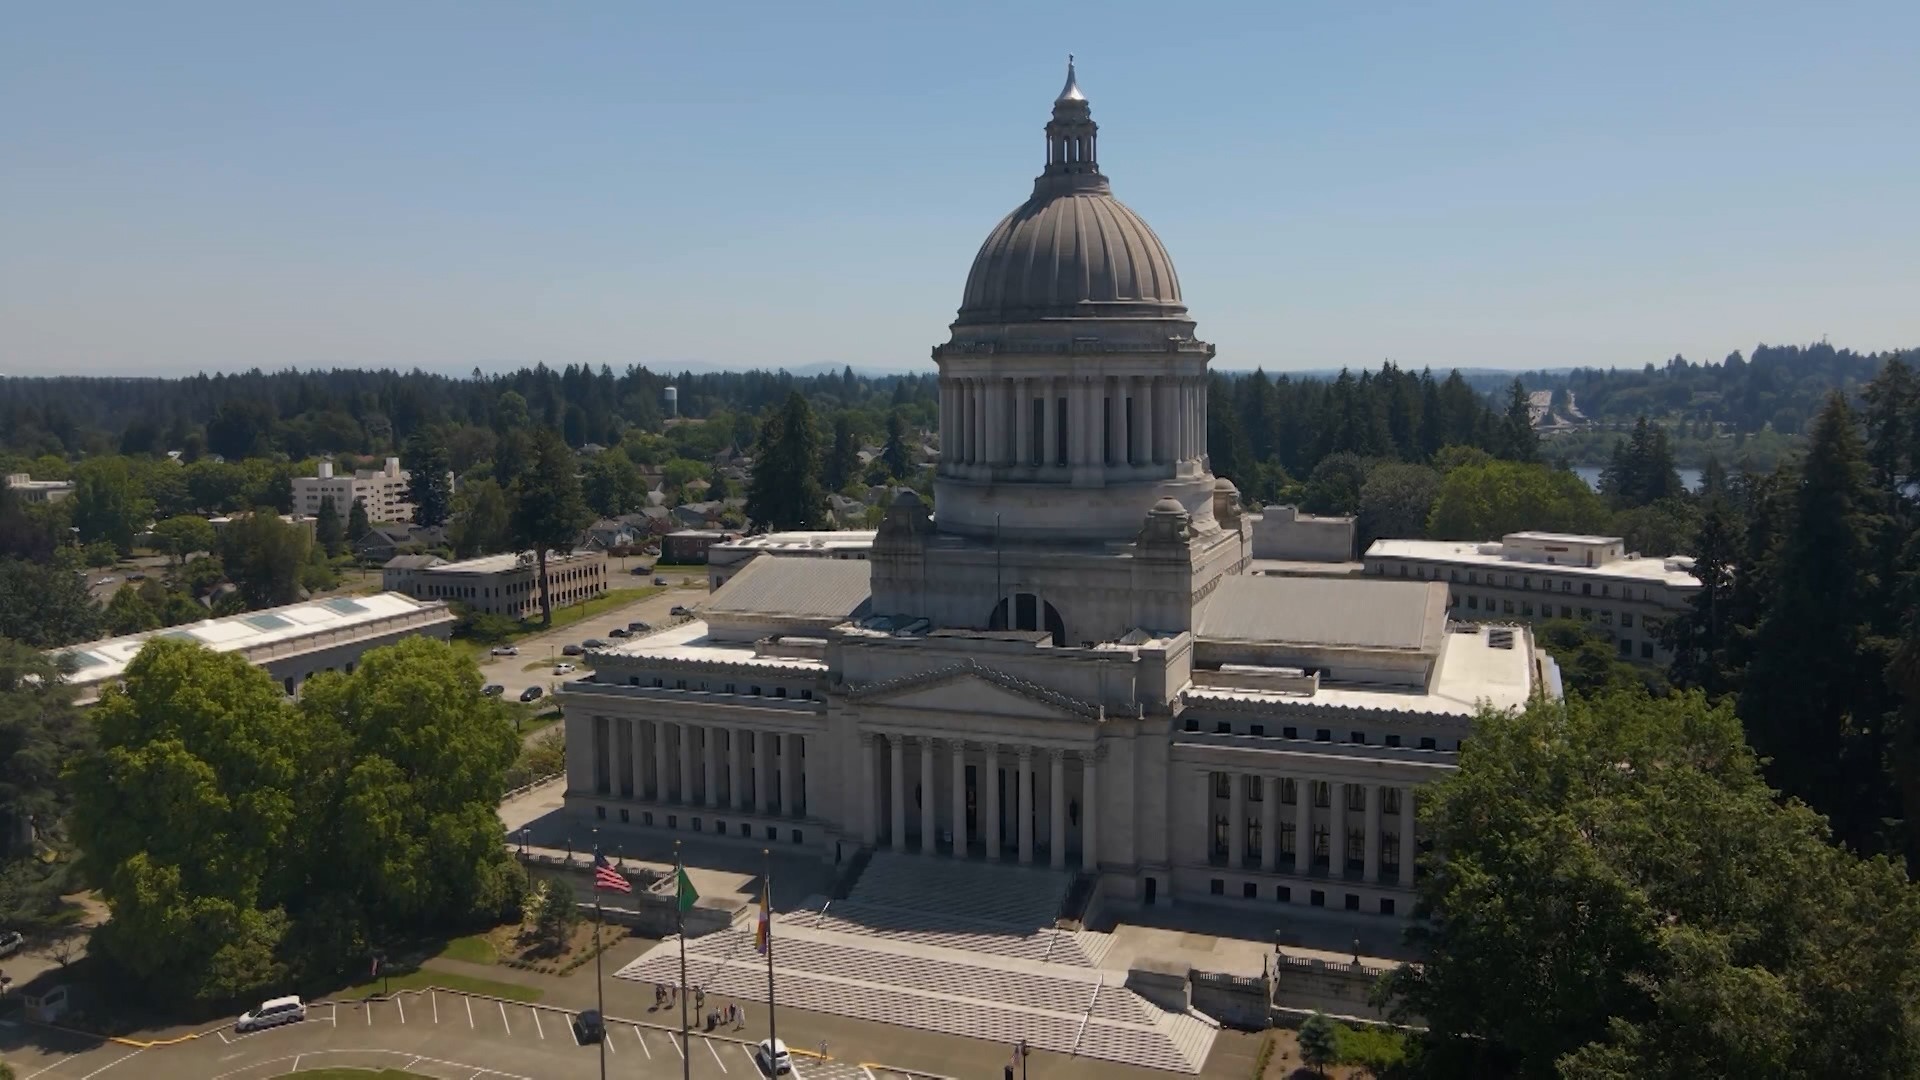 The number of people killed on Washington roads and highways continues to increase and could motivate lawmakers to seek legislative solutions.